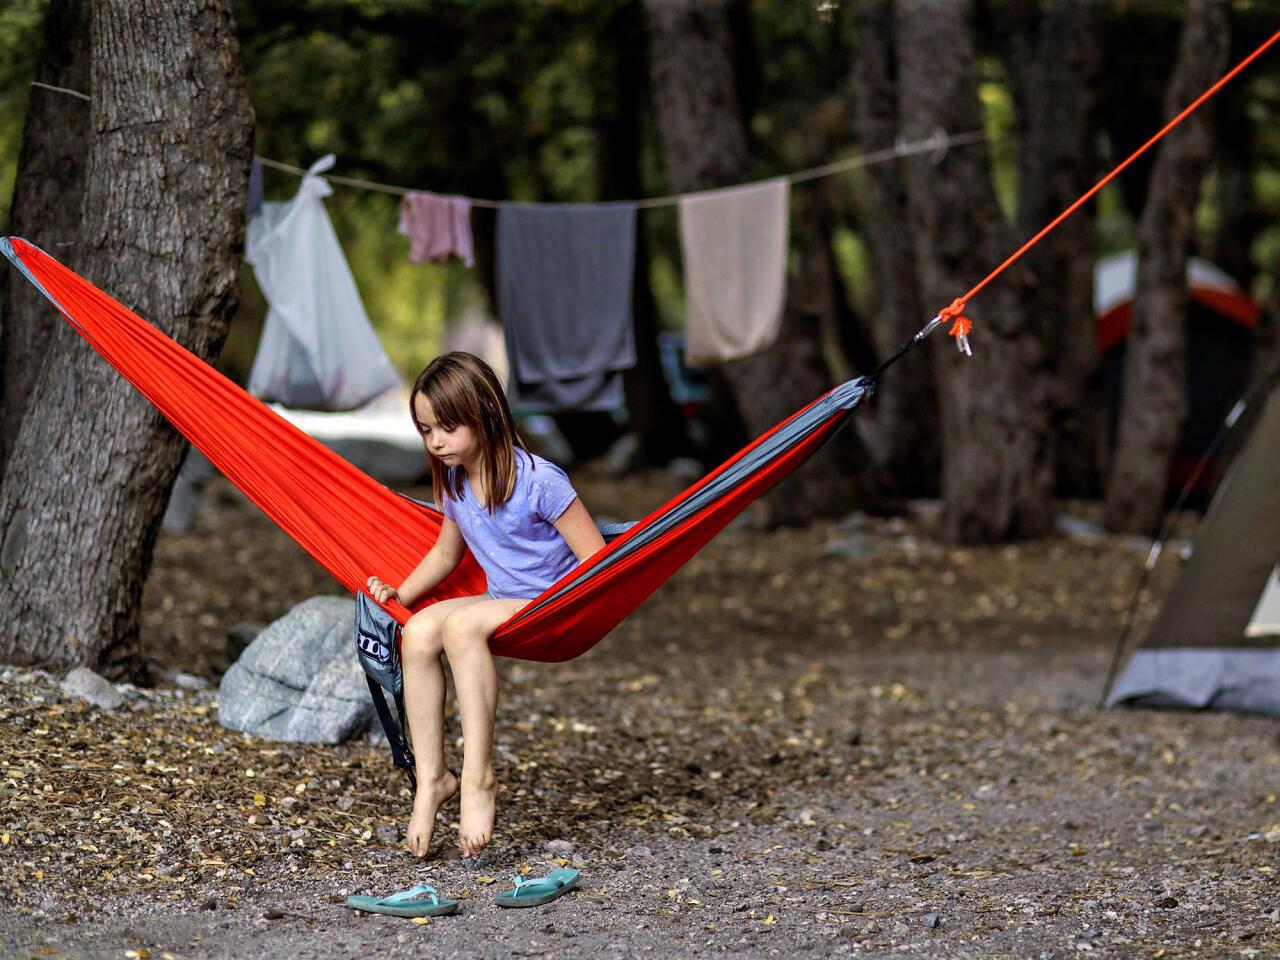 Molly McClure, 7, of Monrovia camps with her dad, Kyle, at the Crystal Lake campground.